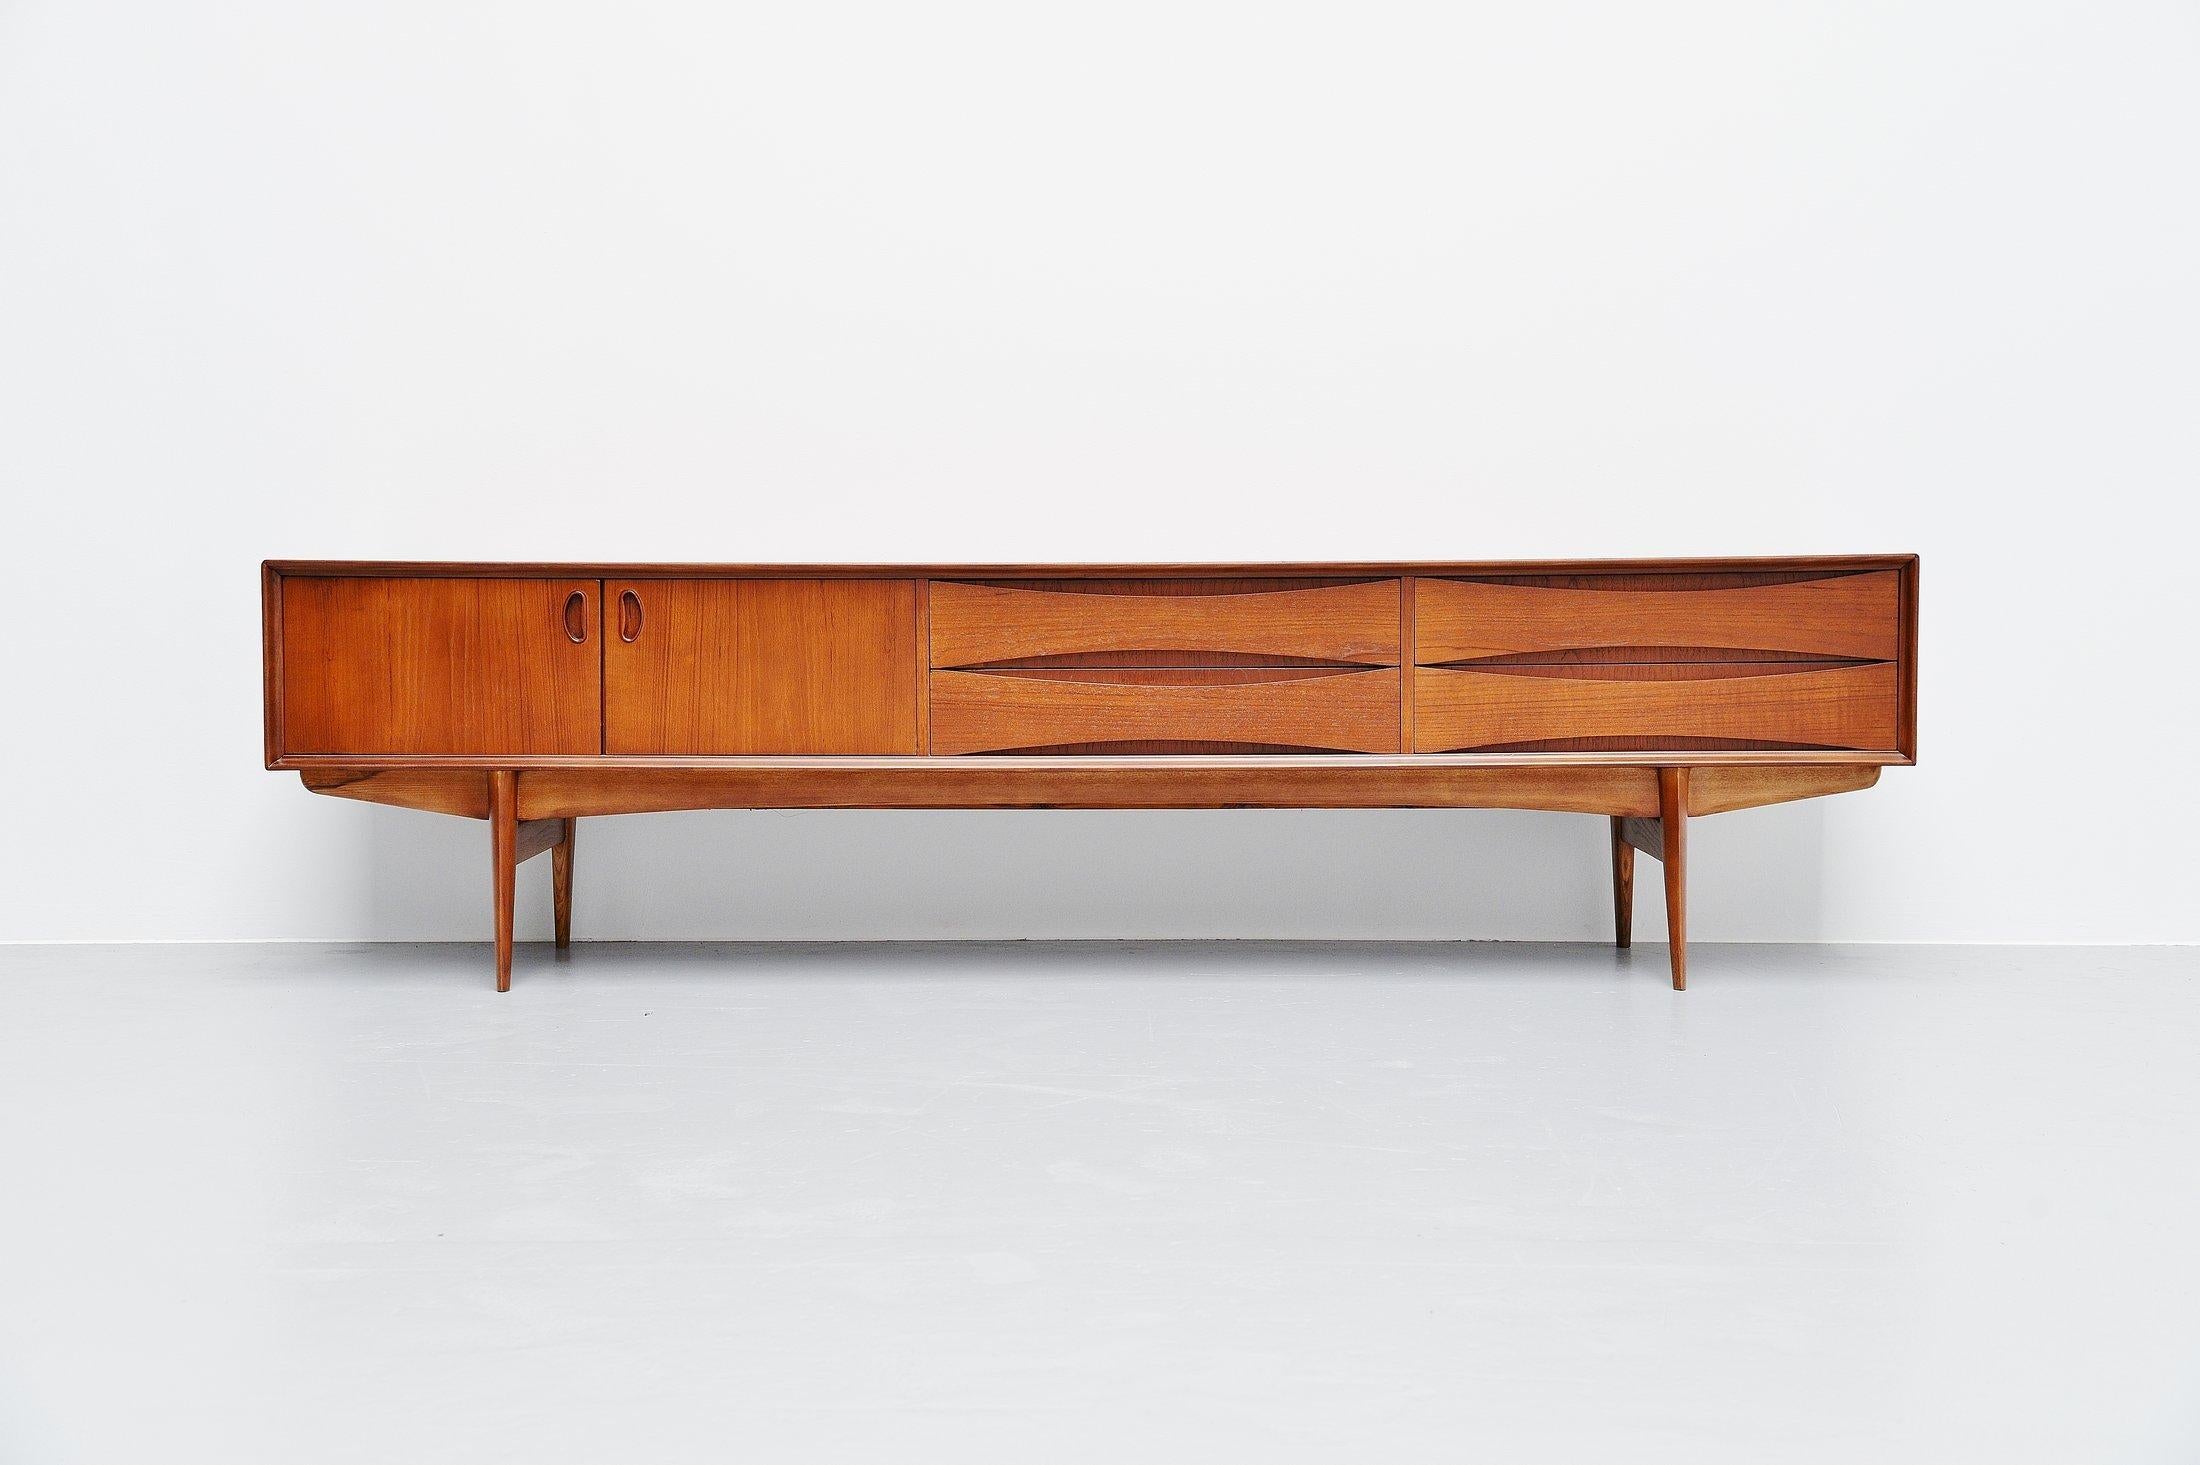 Very nice and quality low sideboard designed by Oswald Vermaercke and manufactured by V-Form, Belgium 1959. This amazing credenza has a very nice and warm teak color and is fully refinished into perfect condition. The designs by Oswald Vermaercke